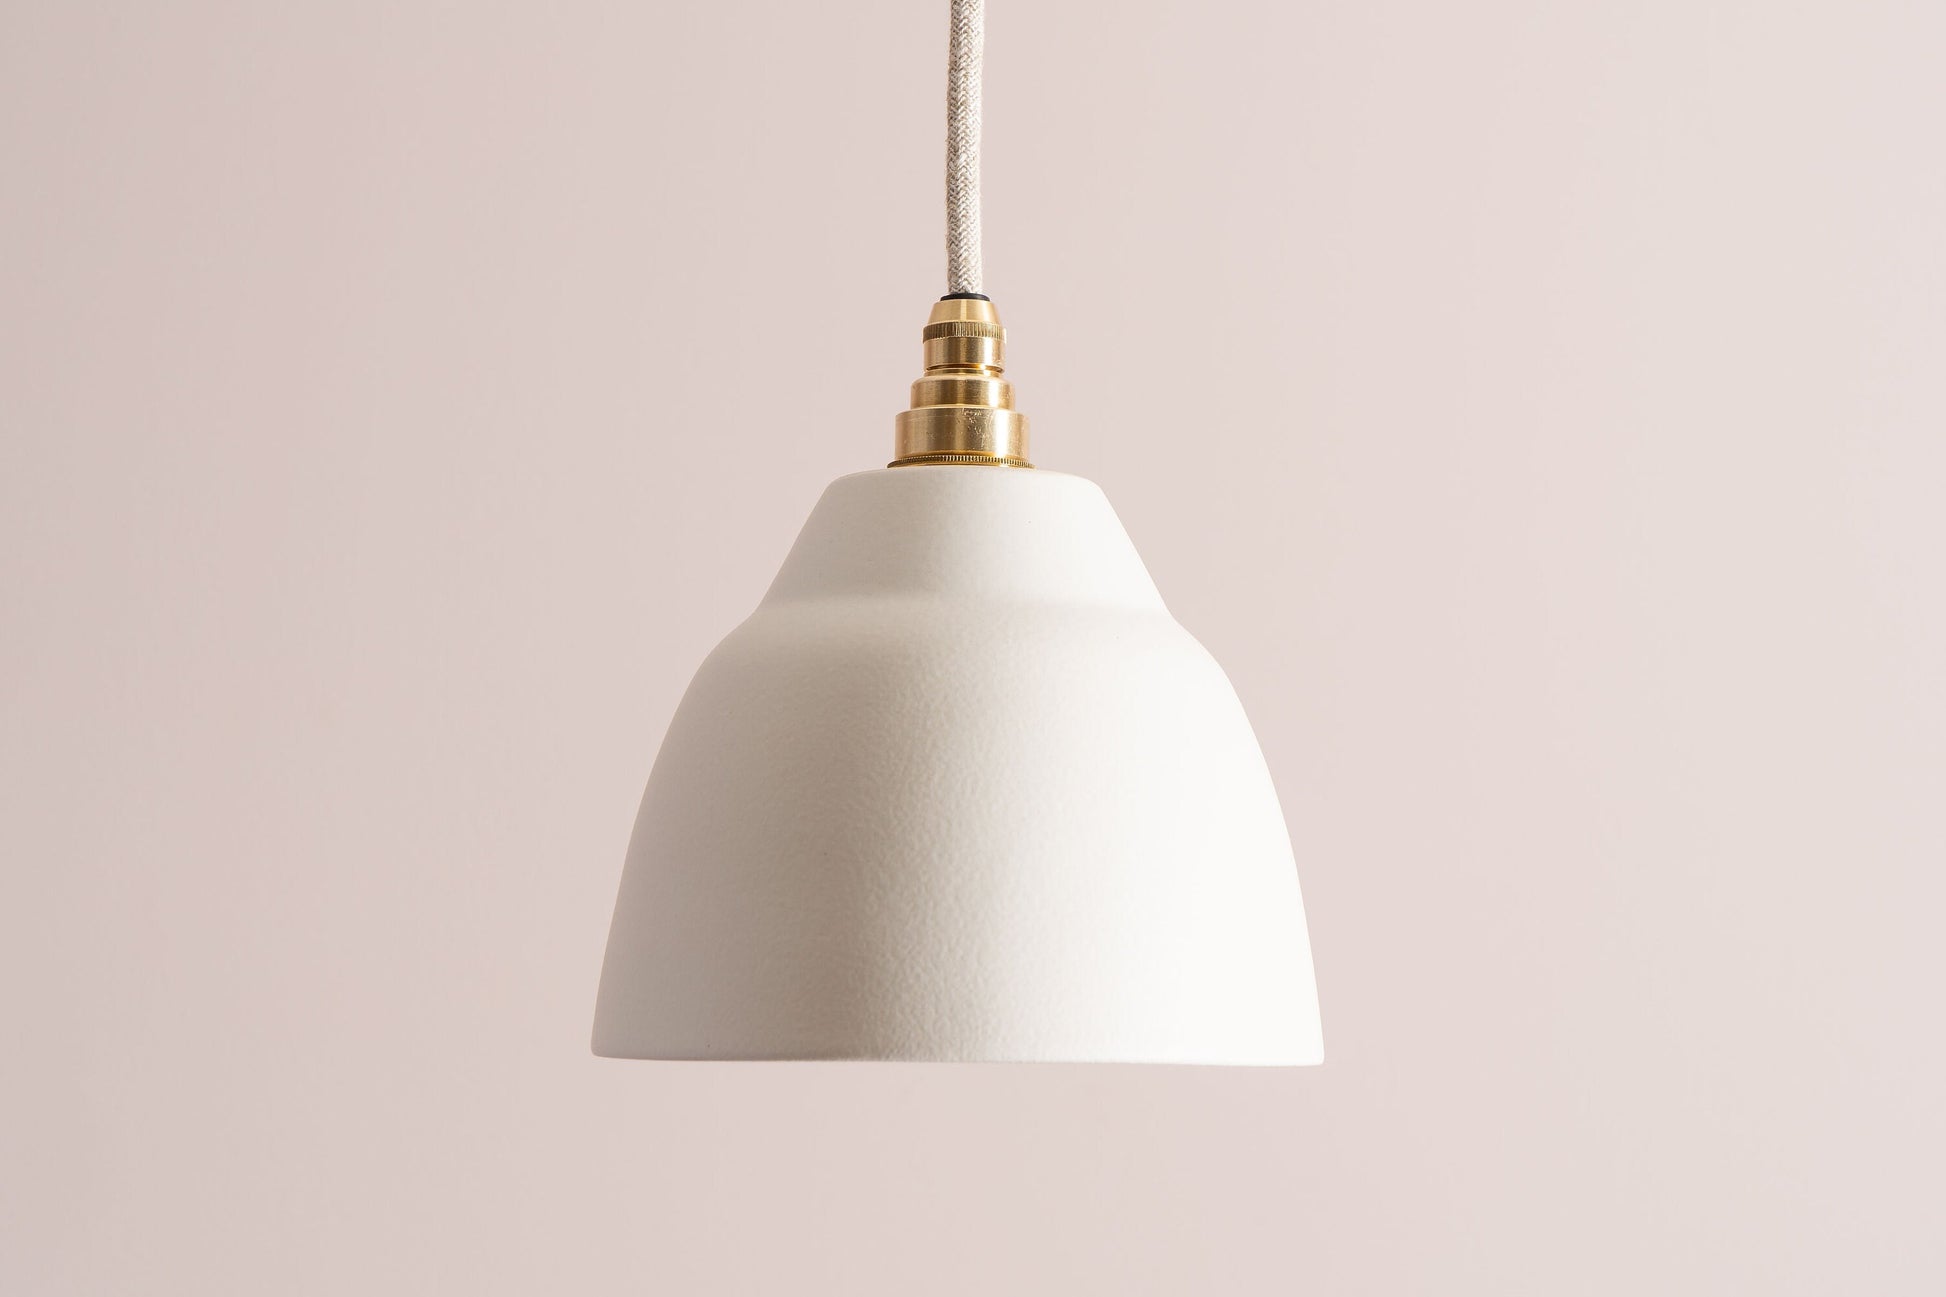 Small White Element Pendant Light in Ceramic and Brass/Nickel by StudioHaran